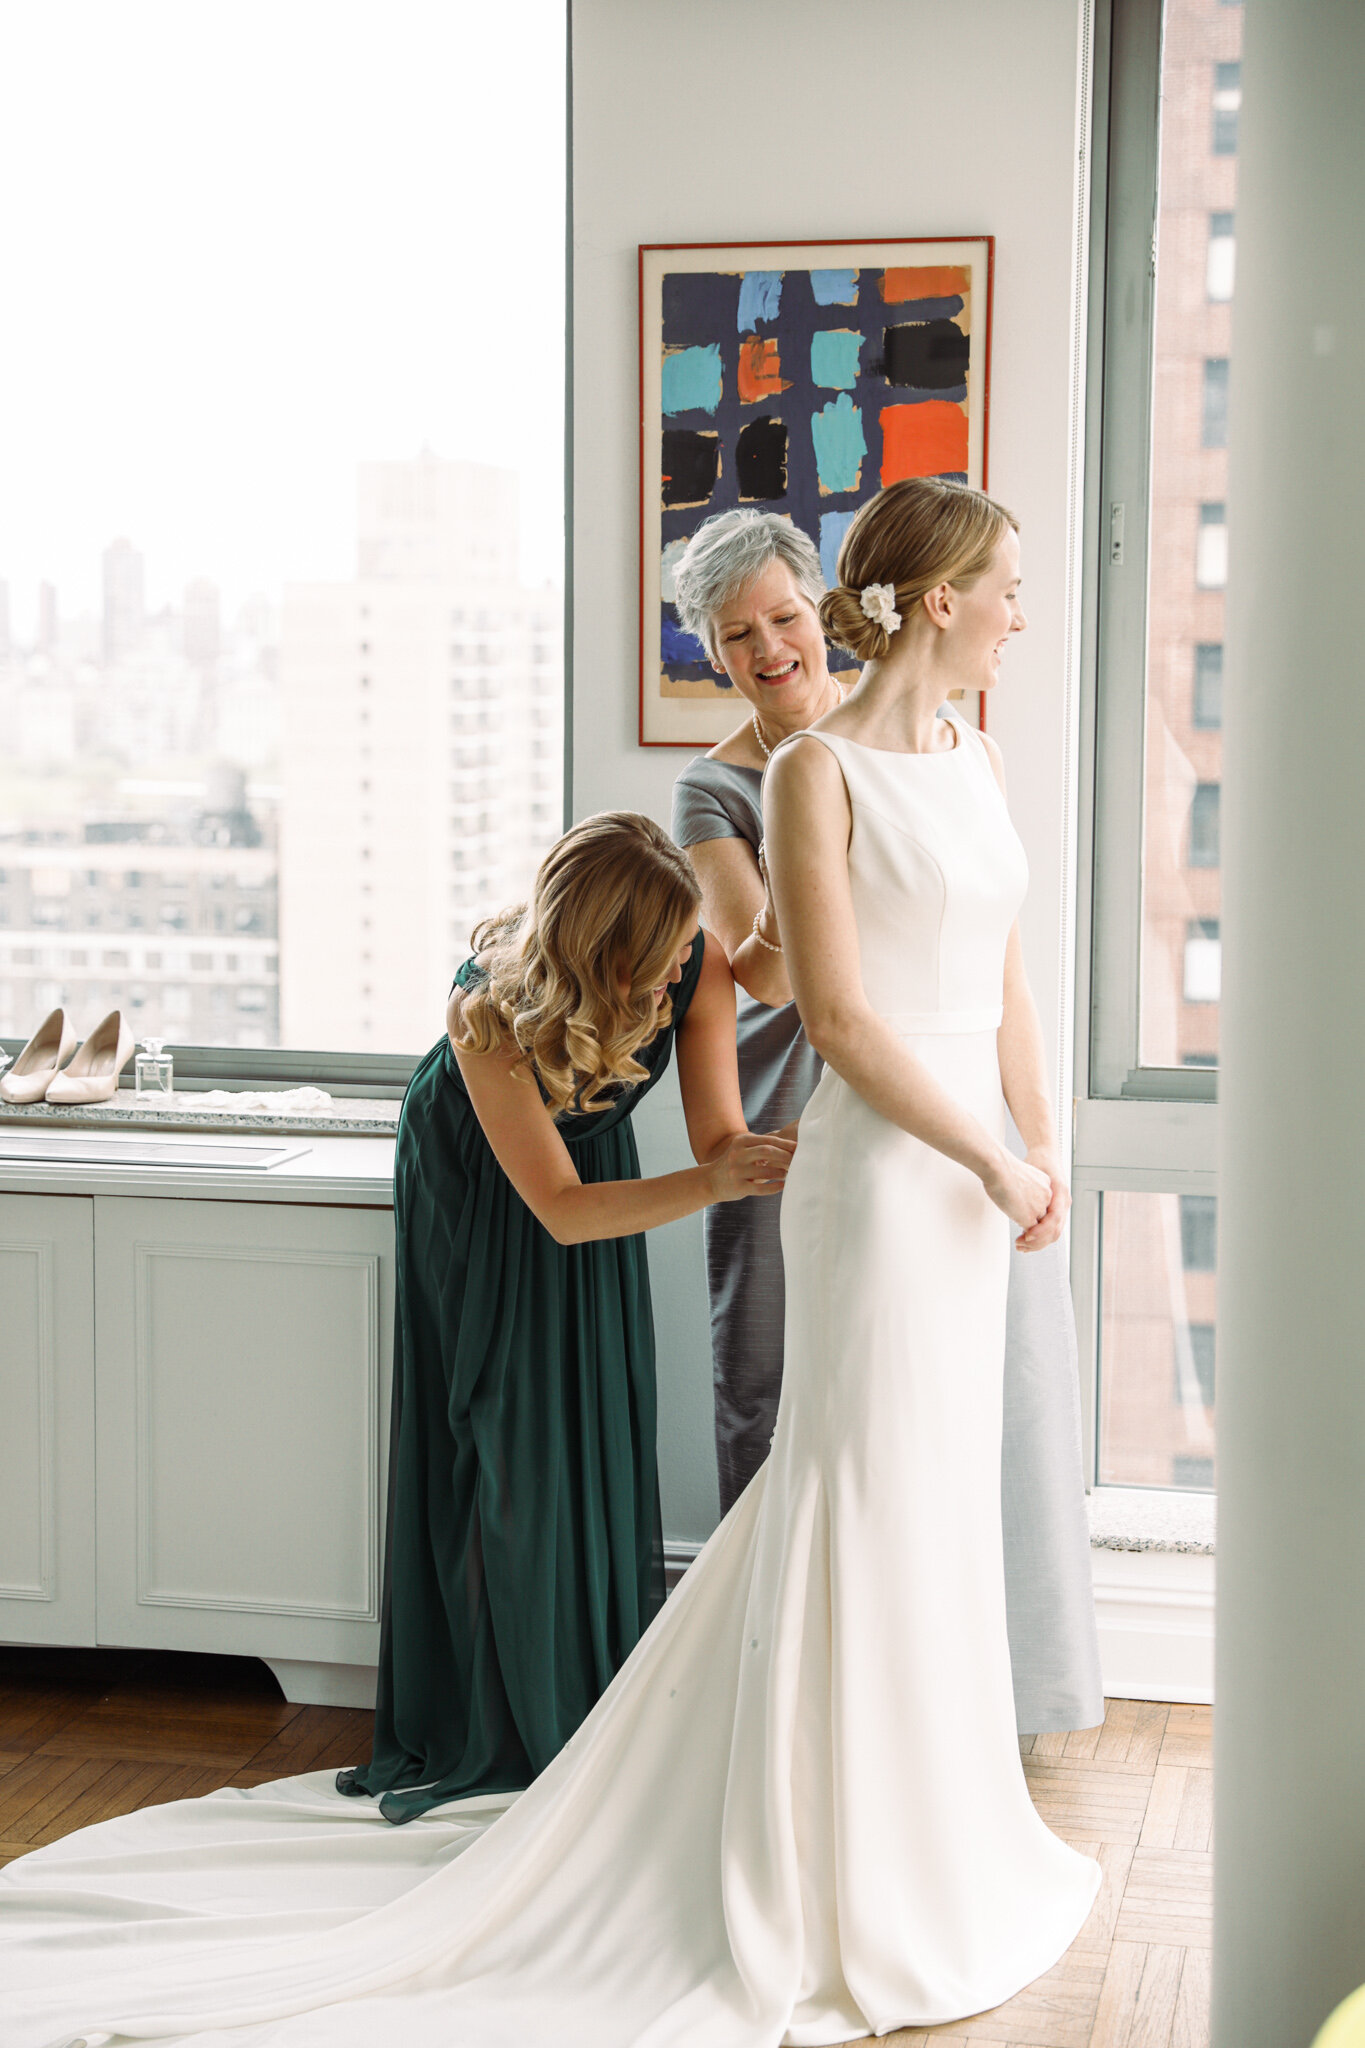 Bride Getting Ready in New York City Apartment